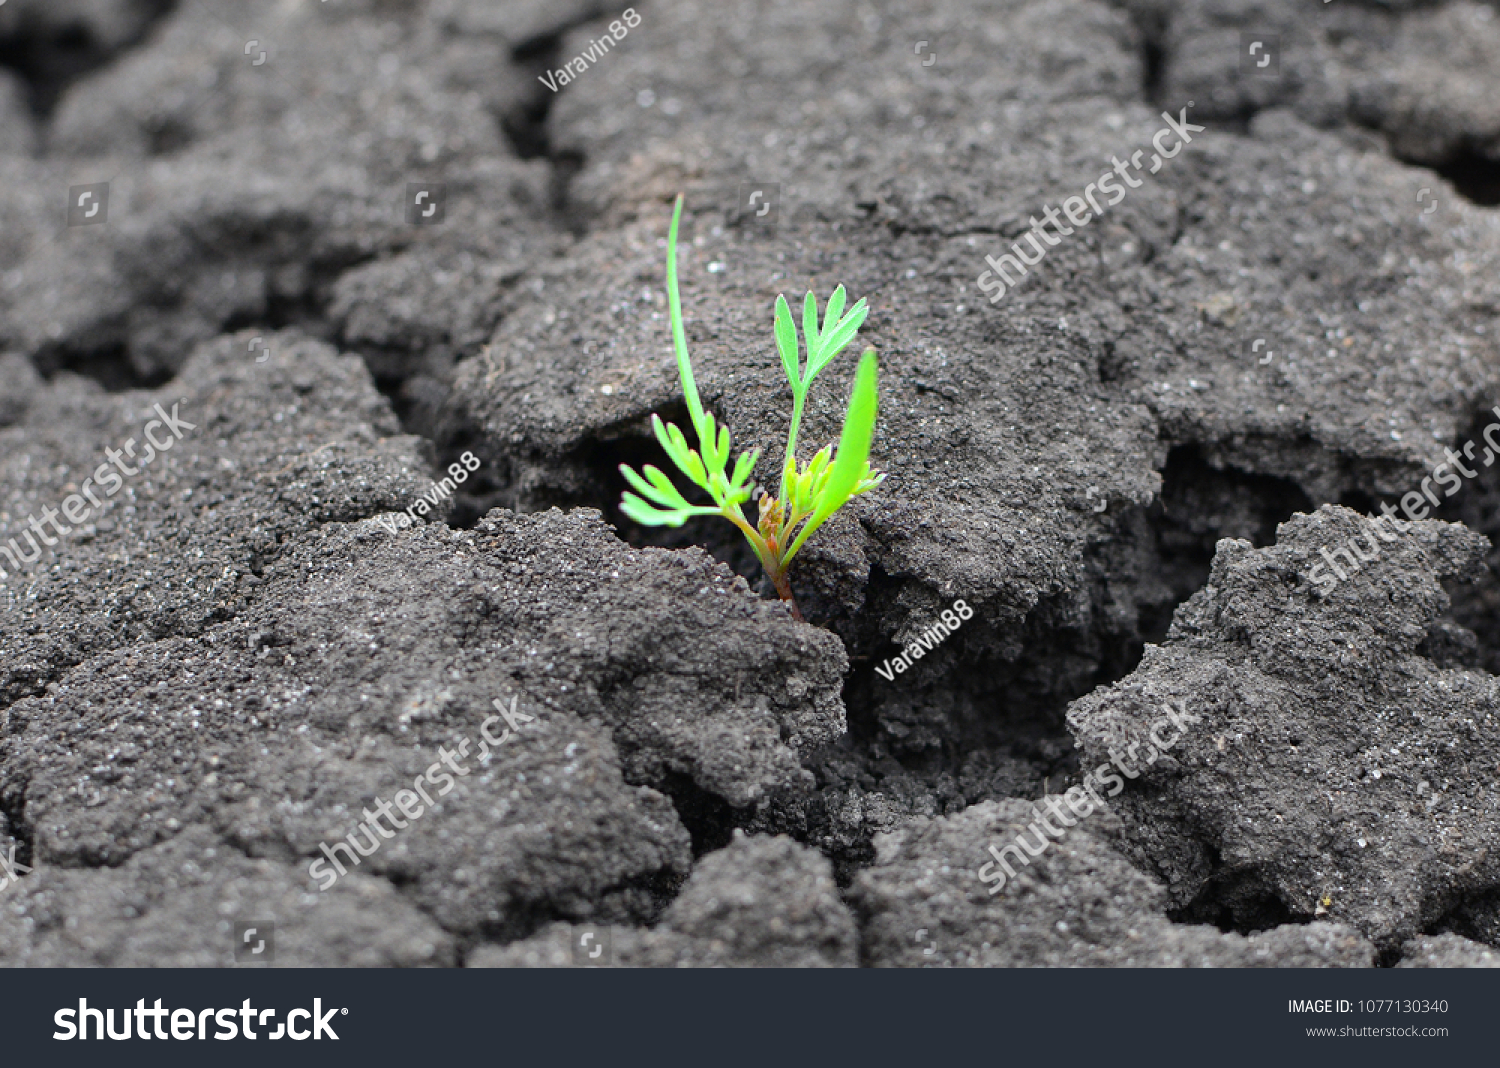 Concept of a life and purpose. Lonely green sprout breaks through the dry earth. Ecology and environment background.  #1077130340